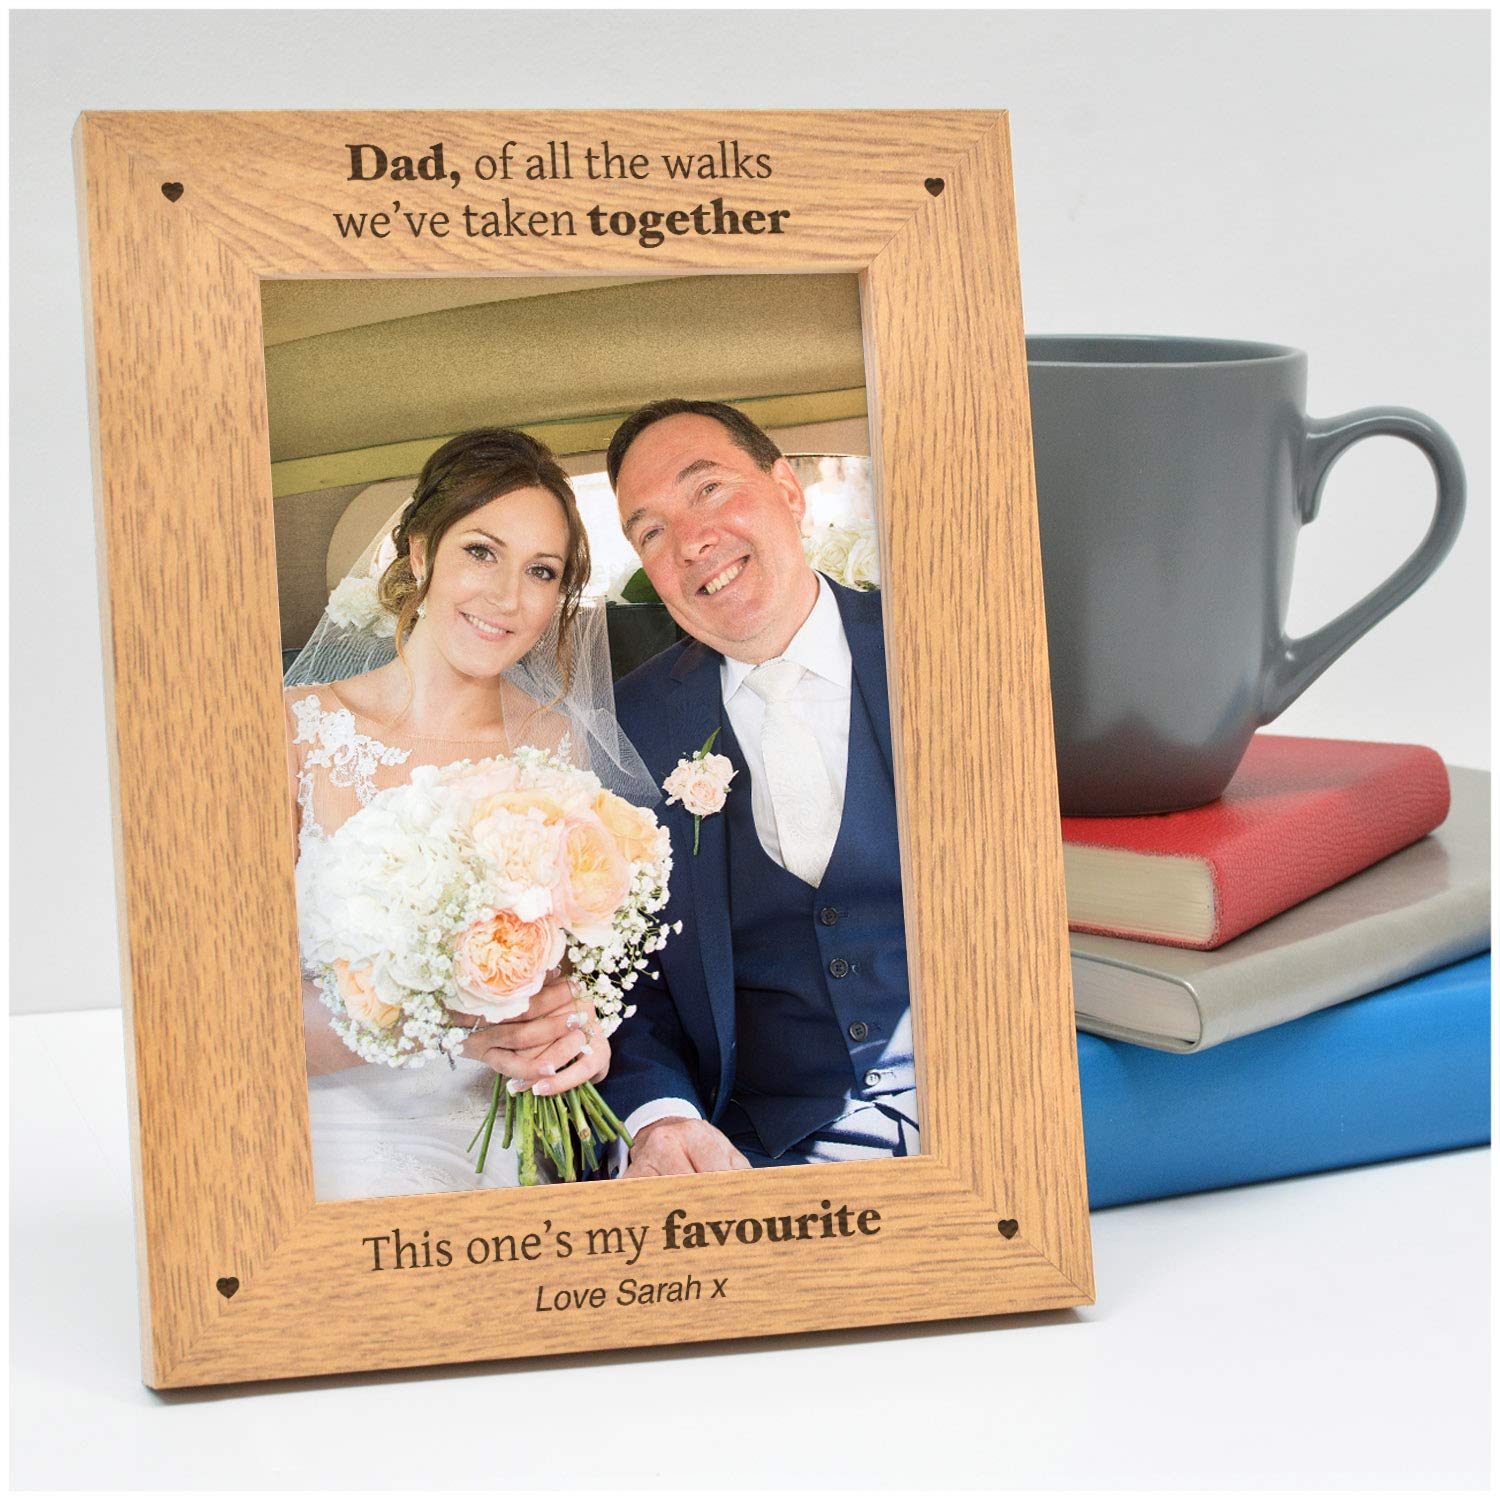 Personalised Father of the Bride Photo Frame Gifts